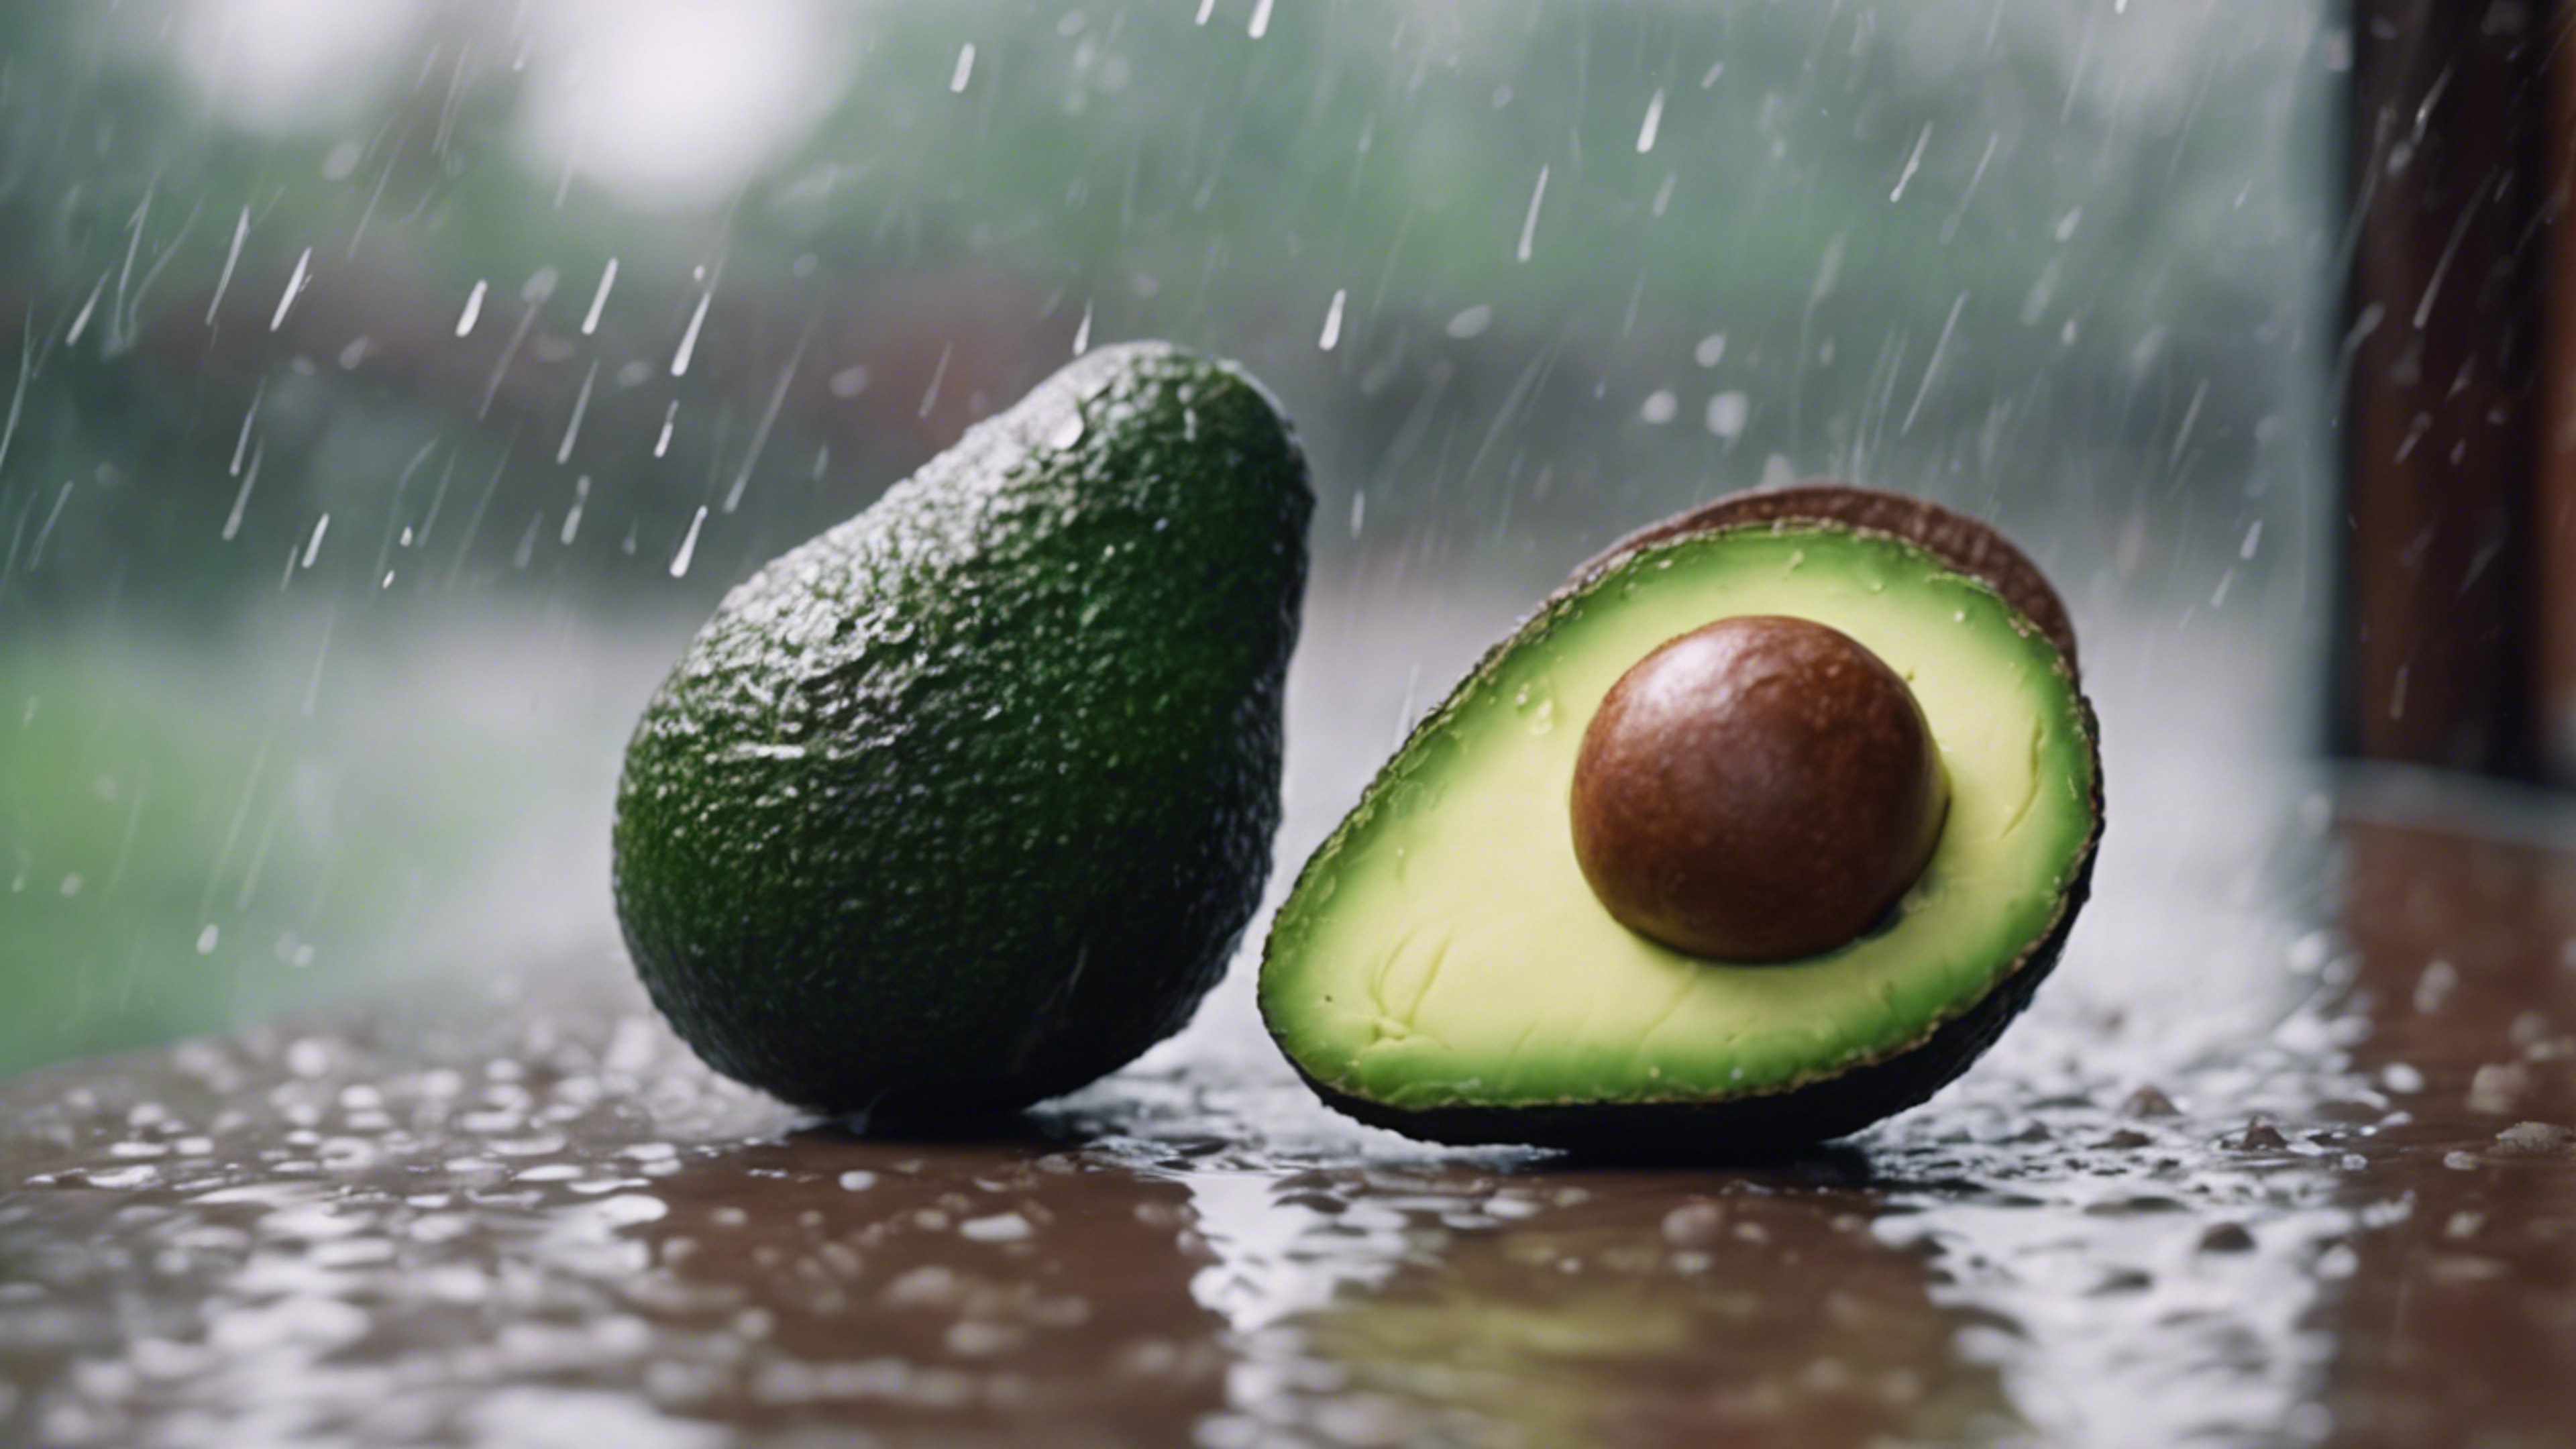 An adorable avocado in a quiet reflection on a rainy day Ფონი[1229e2b9e9634c7f8c86]